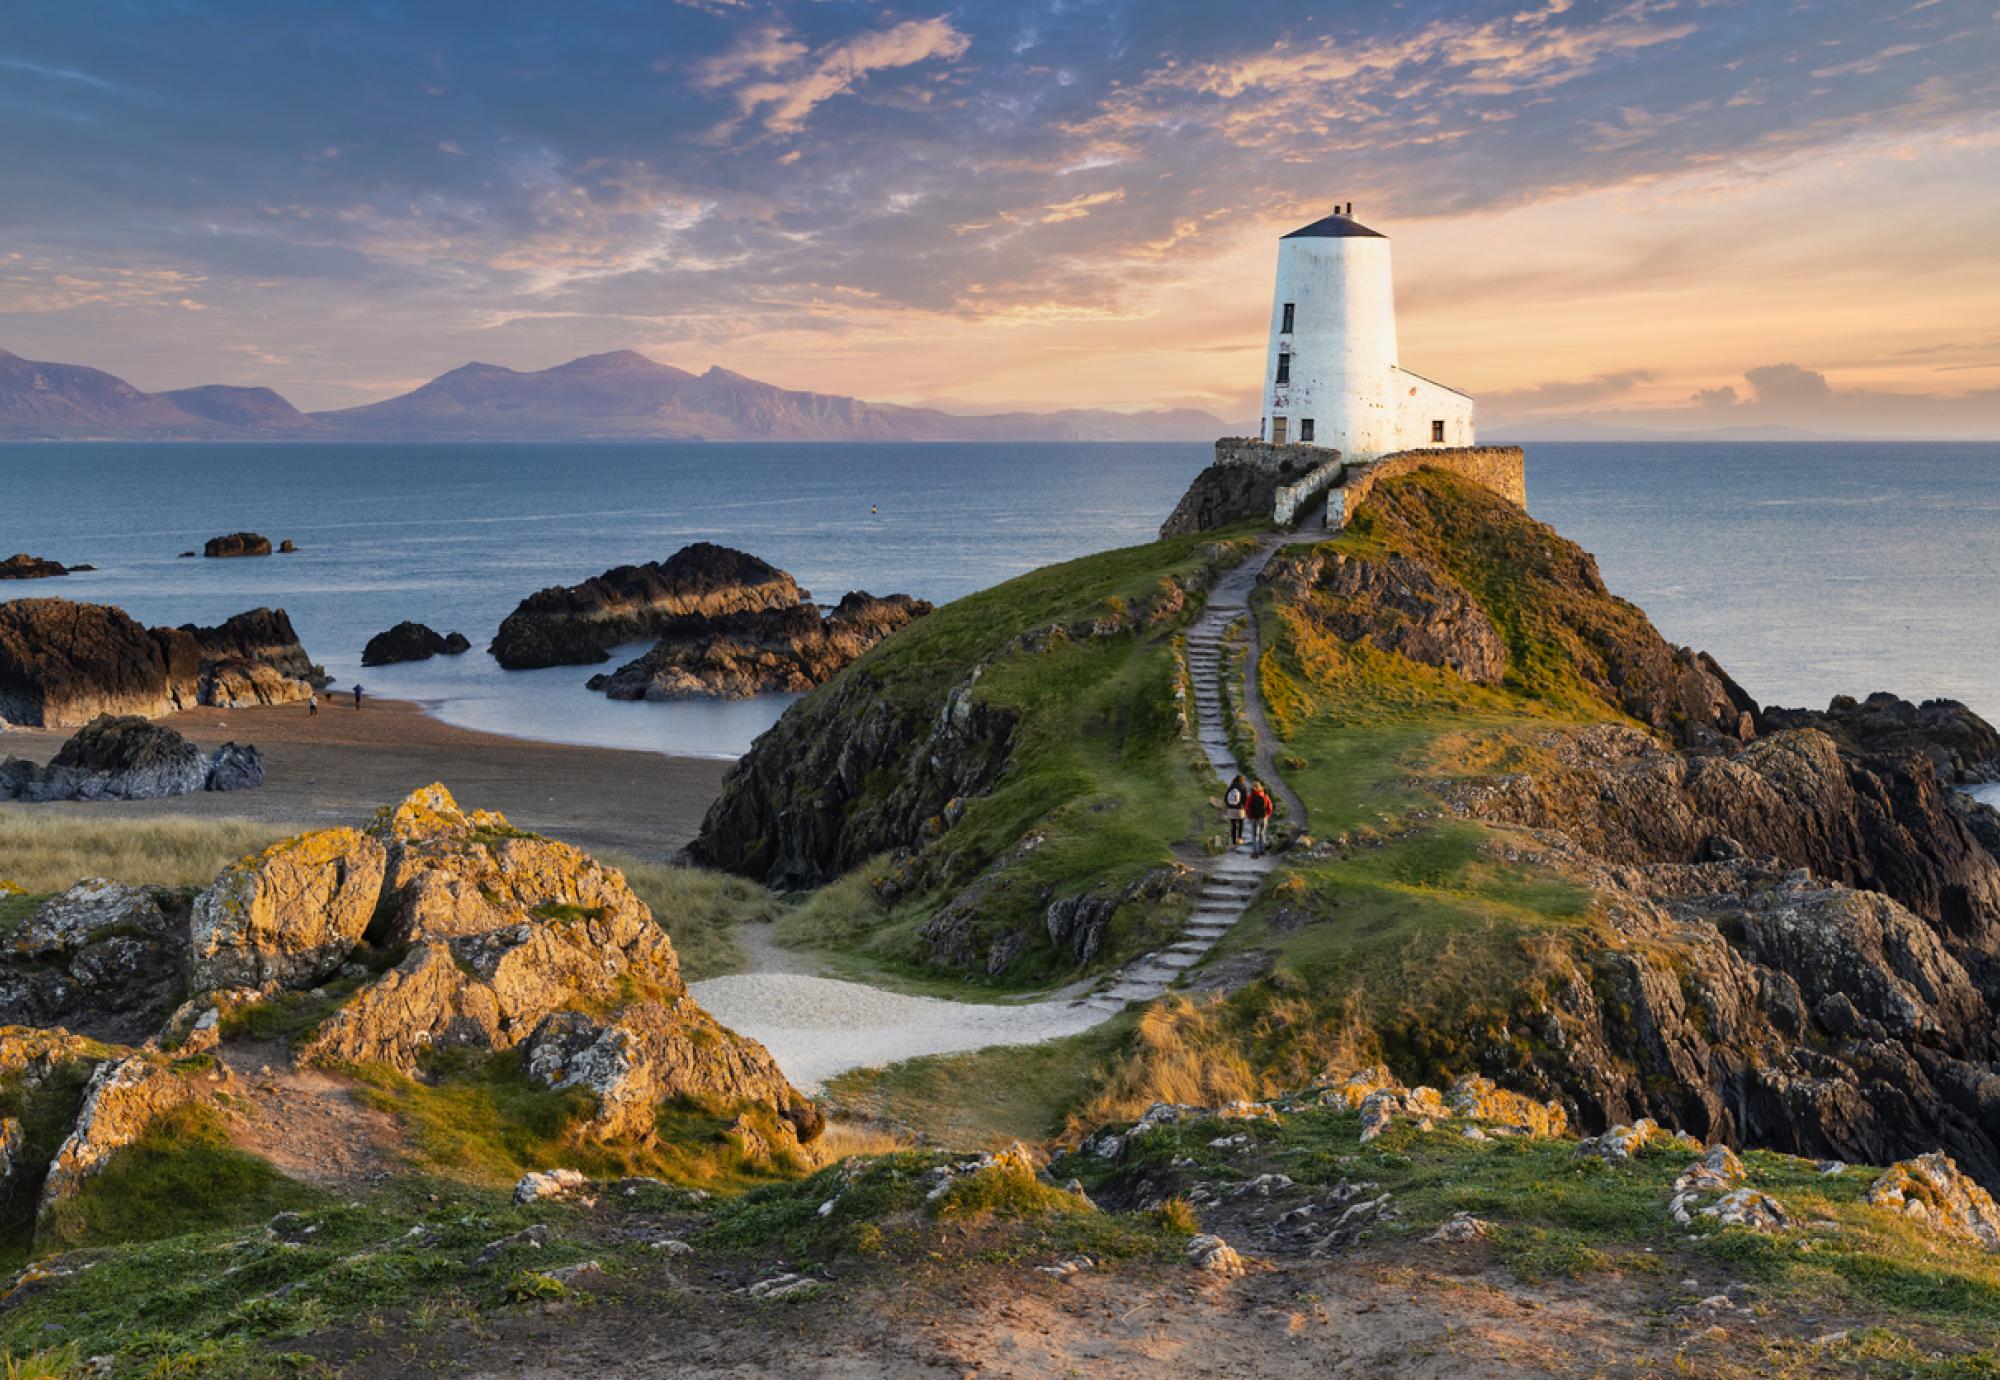 Lighthouse in Wales